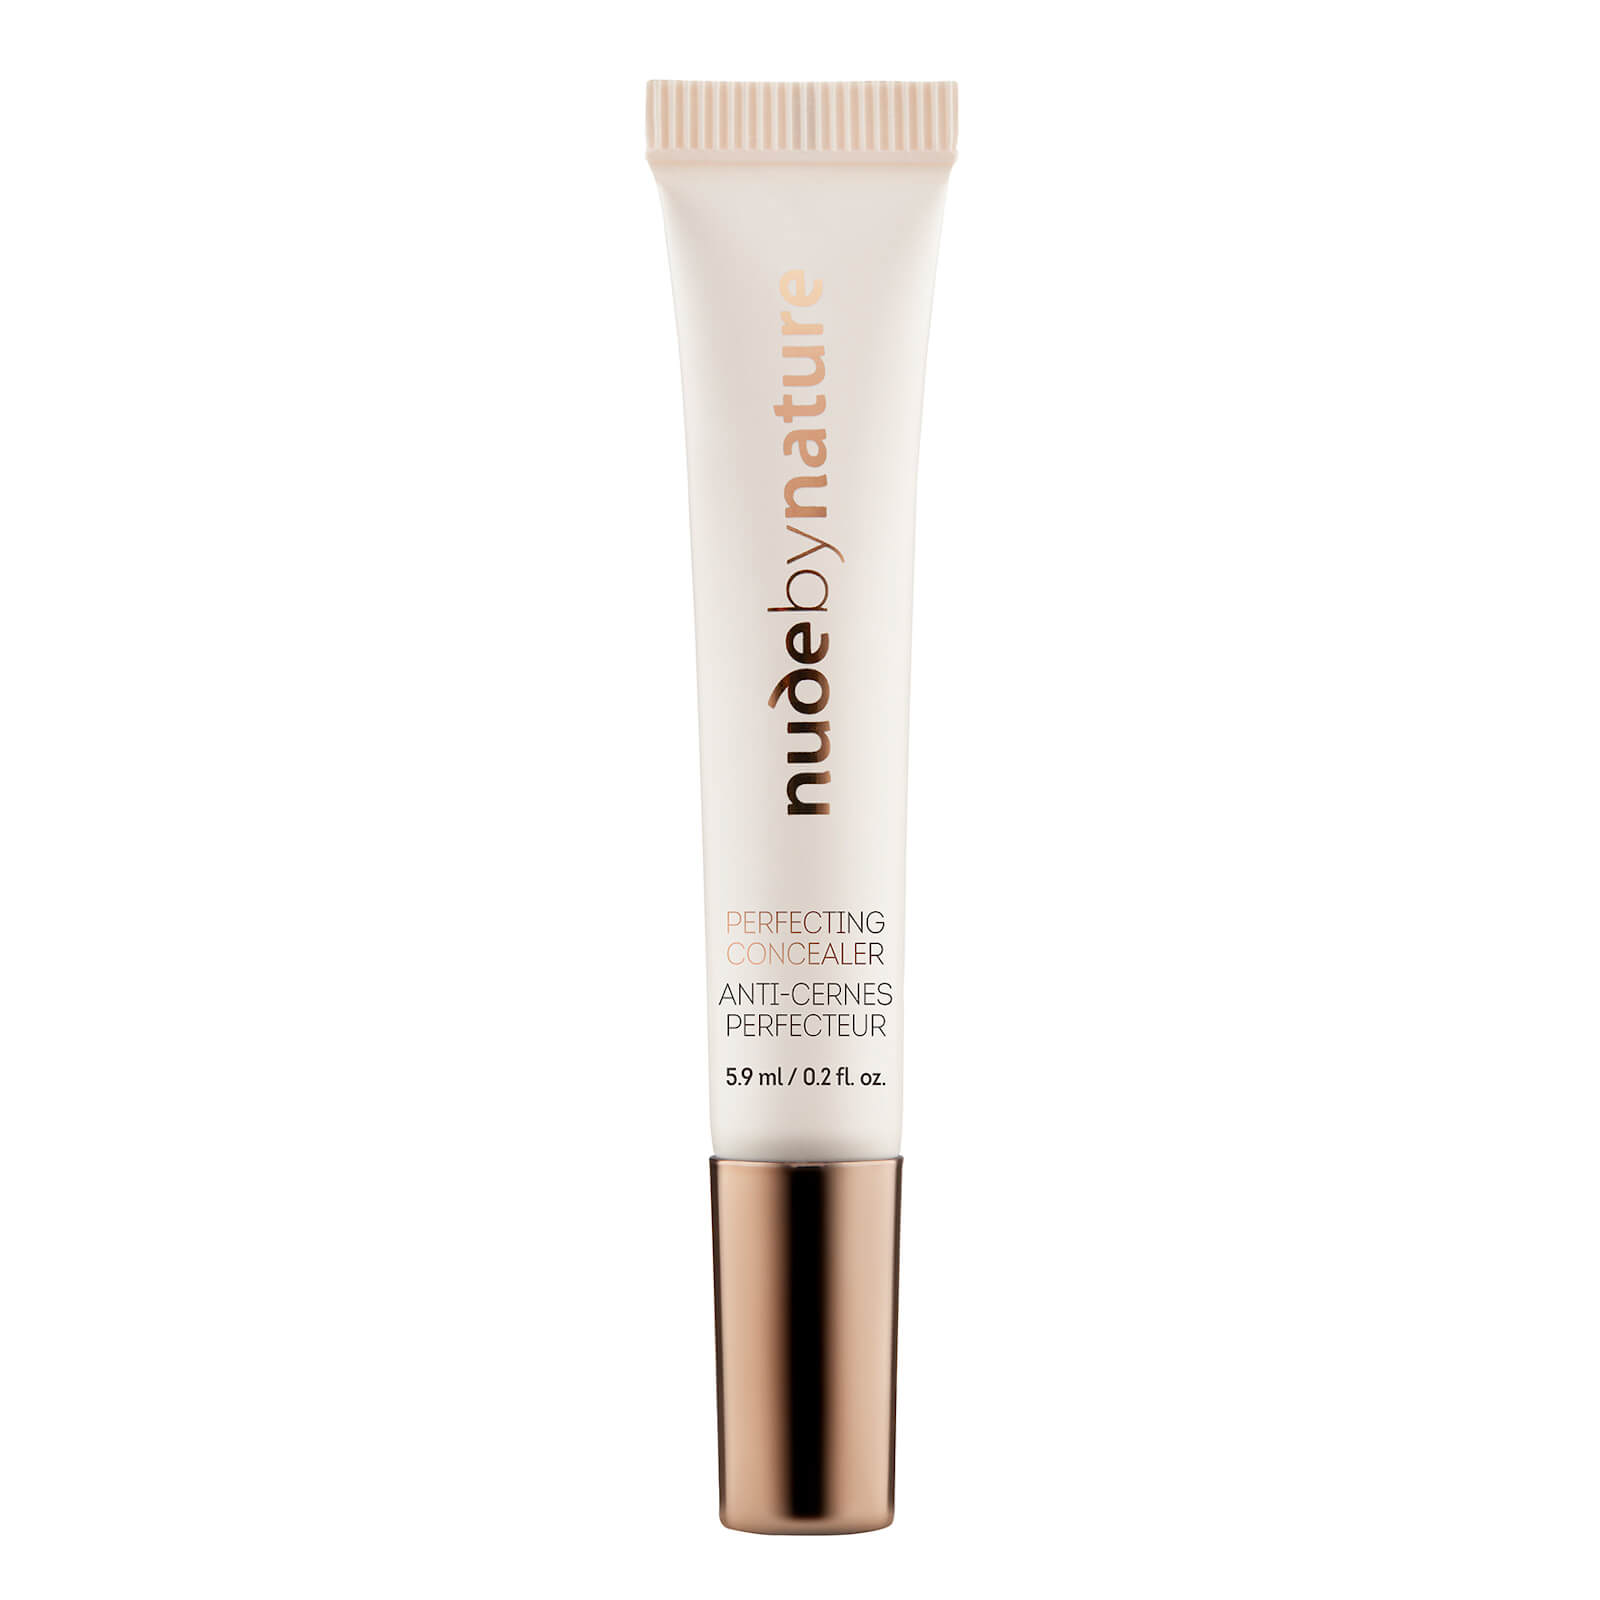 nude by nature Perfecting Concealer 5.9ml (Various Shades) - 02 Porcelain Beige